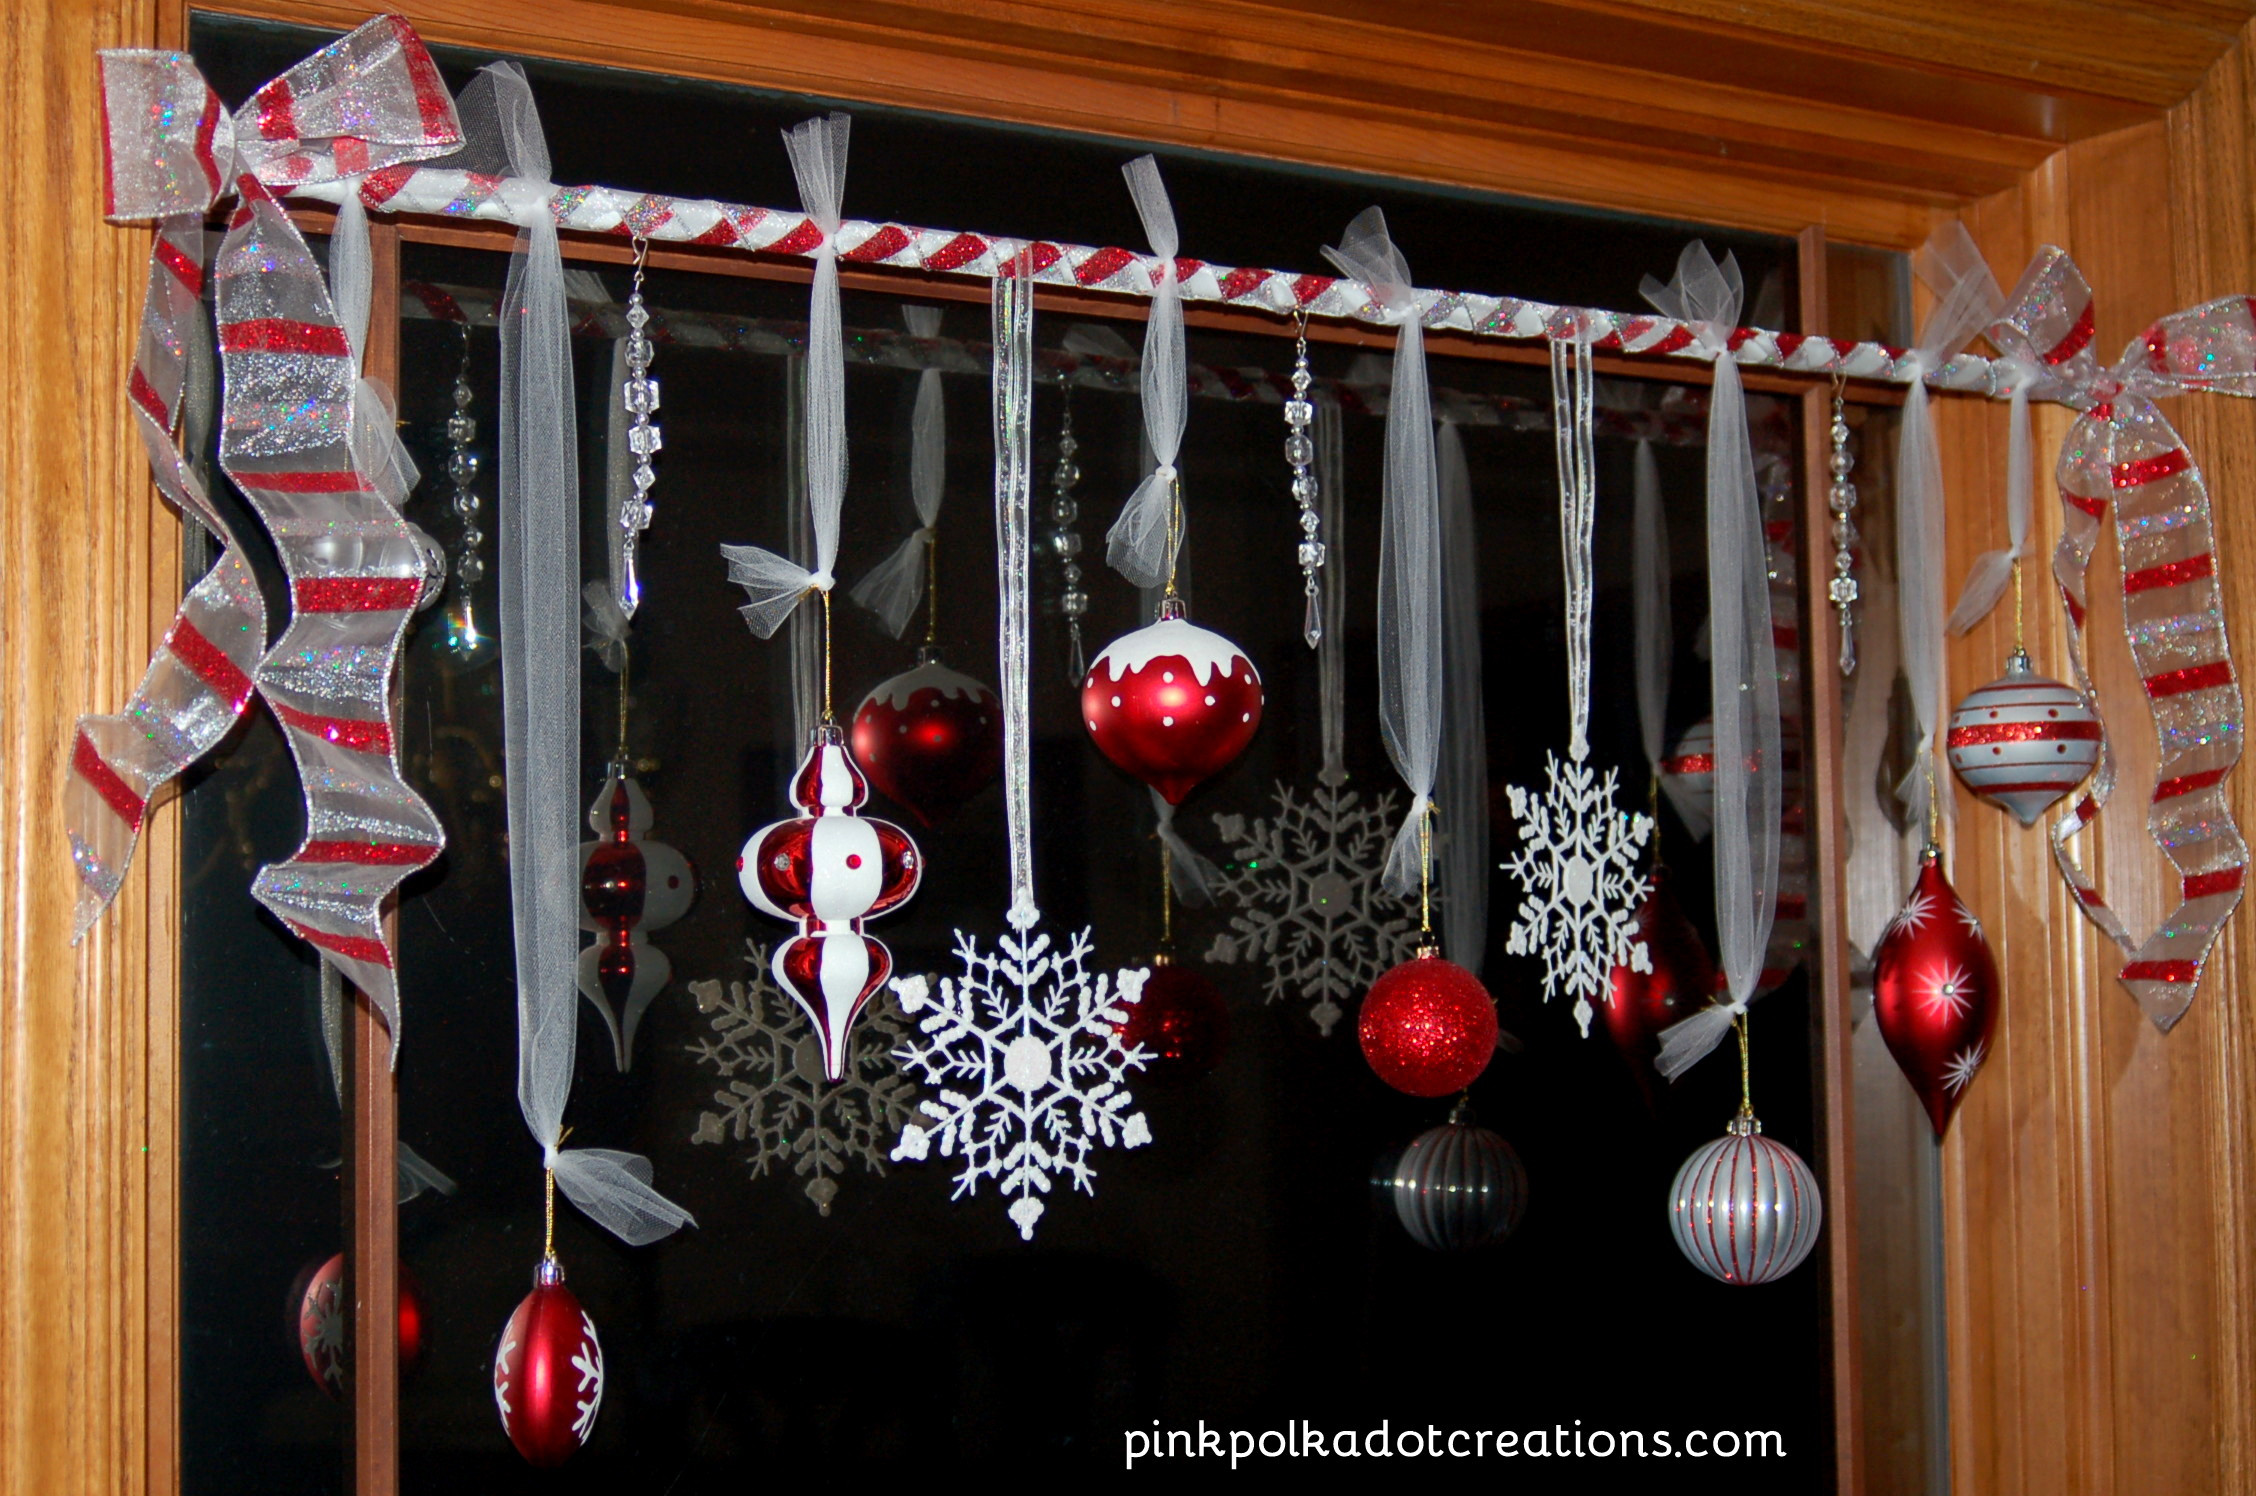 Best ideas about DIY Christmas Window Decorations
. Save or Pin Christmas Window Treatments Pink Polka Dot Creations Now.